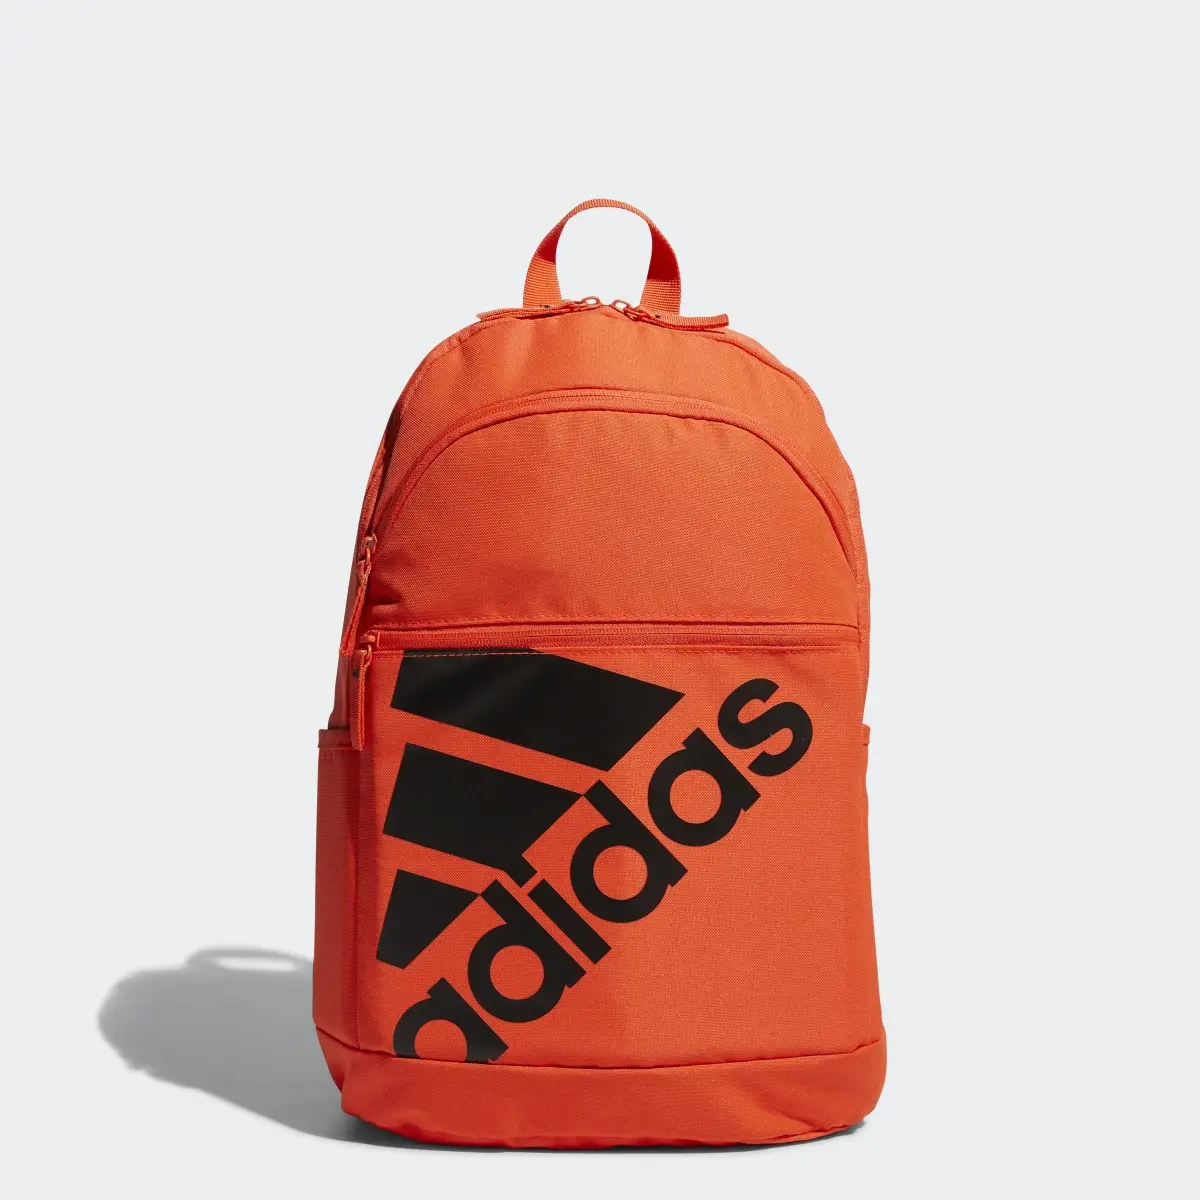 Adidas CL Classic Backpack. 1